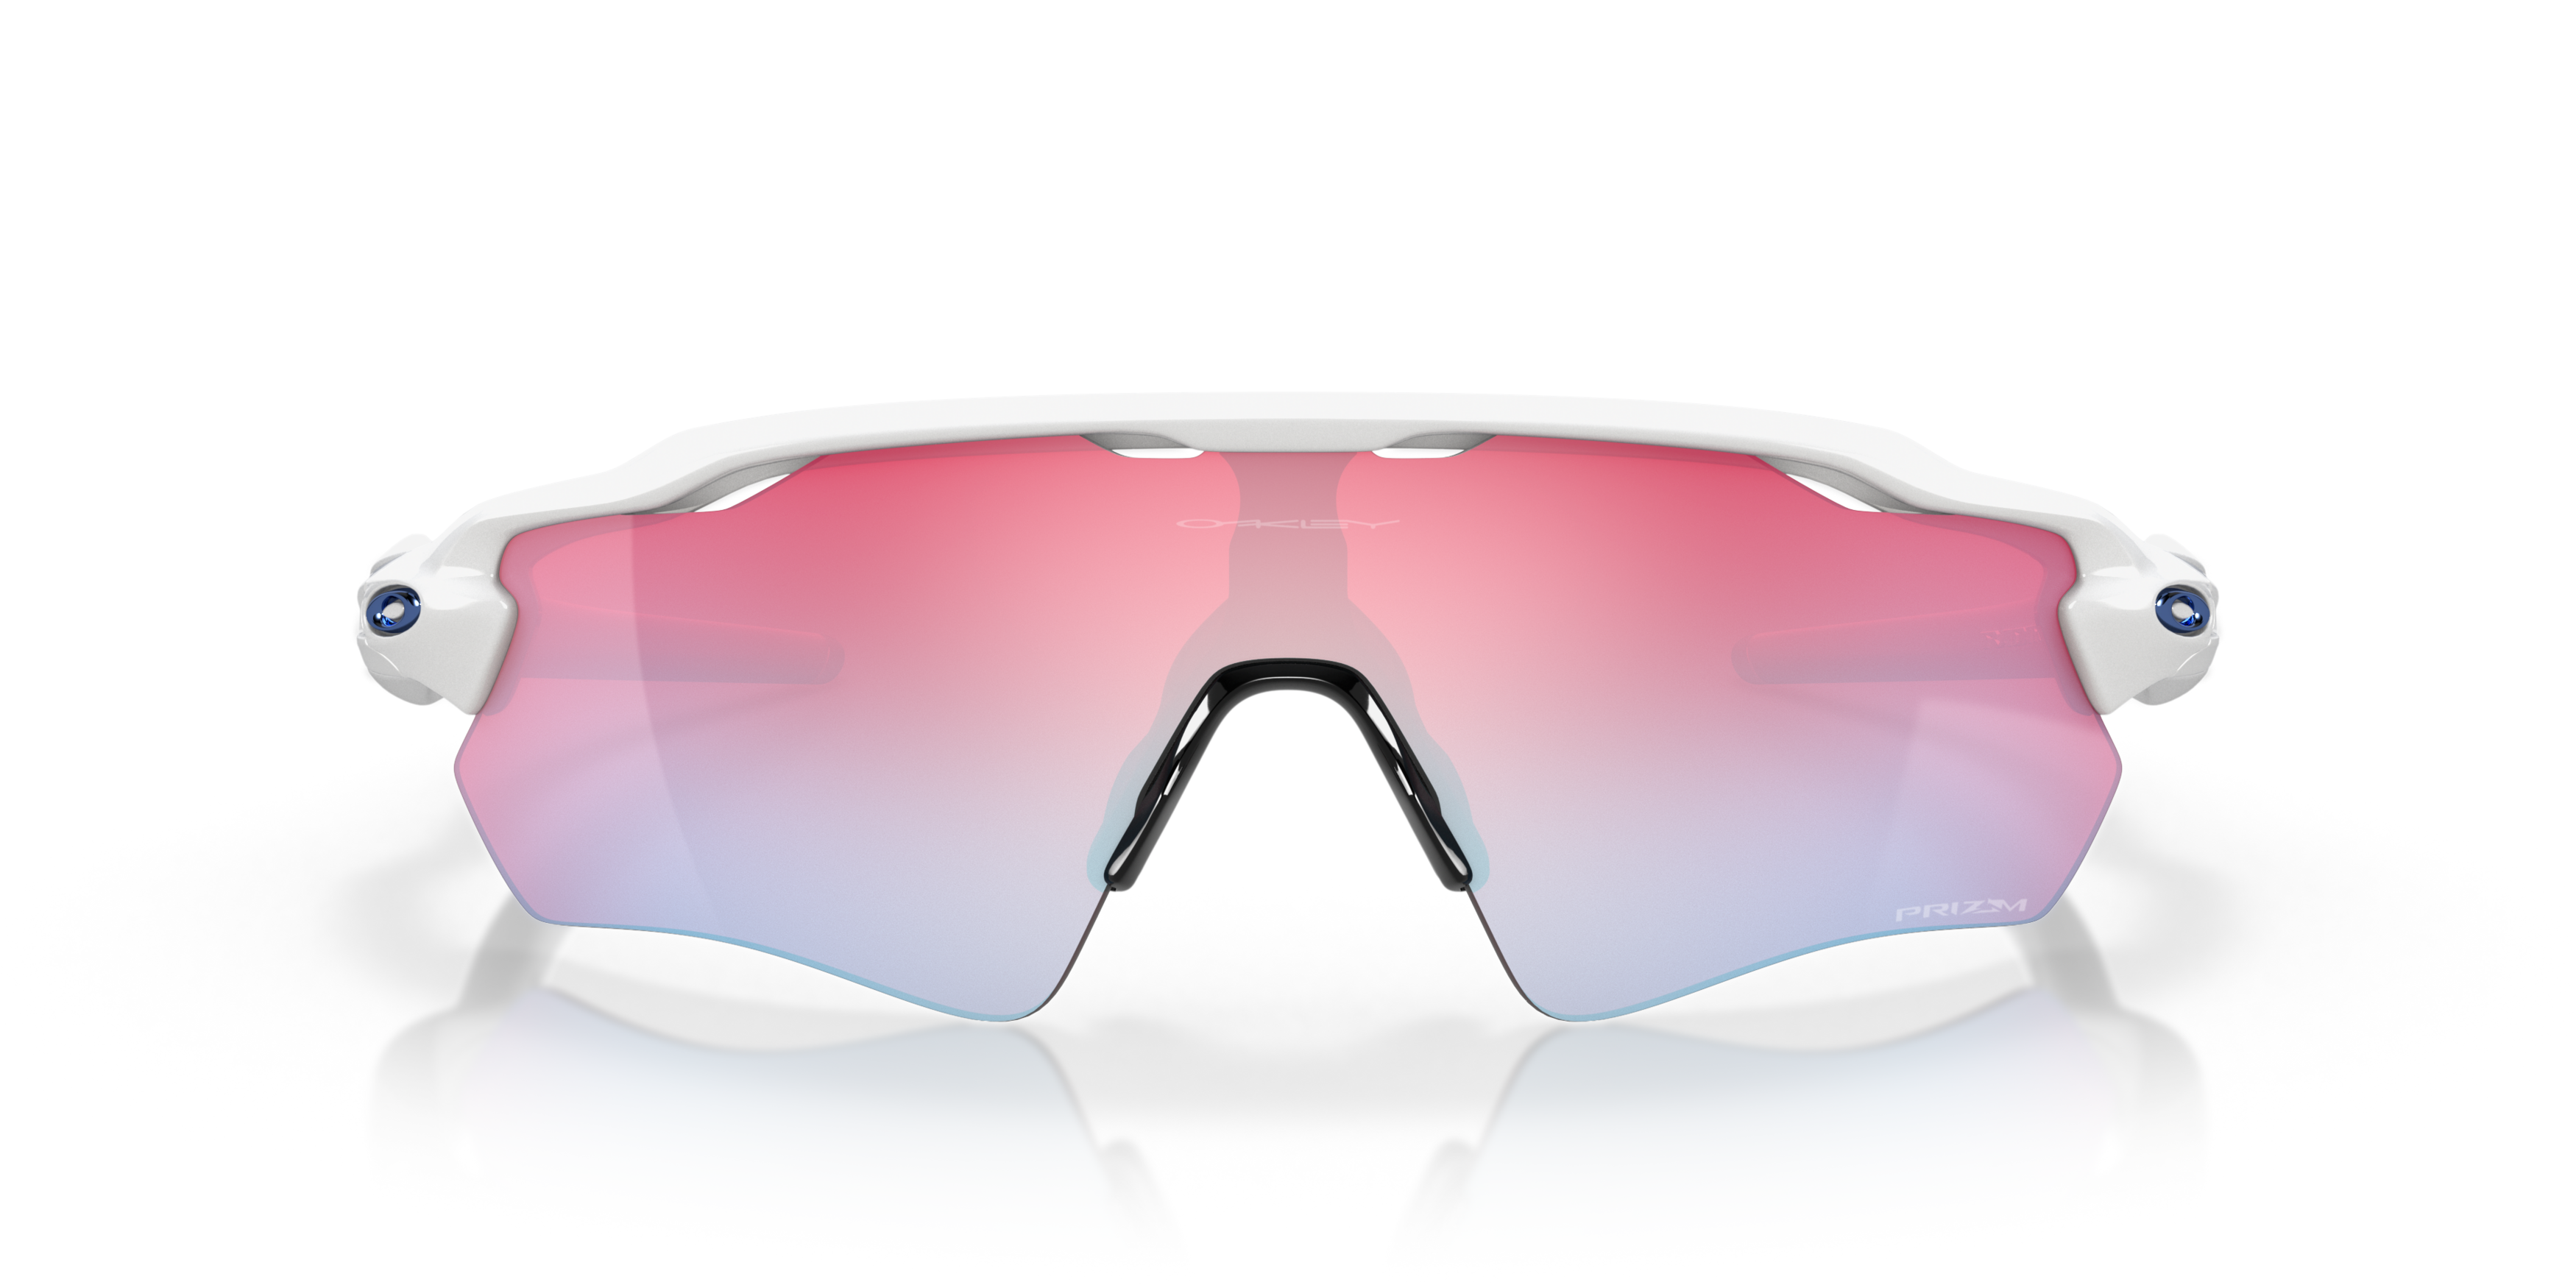 [products.image.front] Oakley Radar EV Path OO 9208 Sunglasses